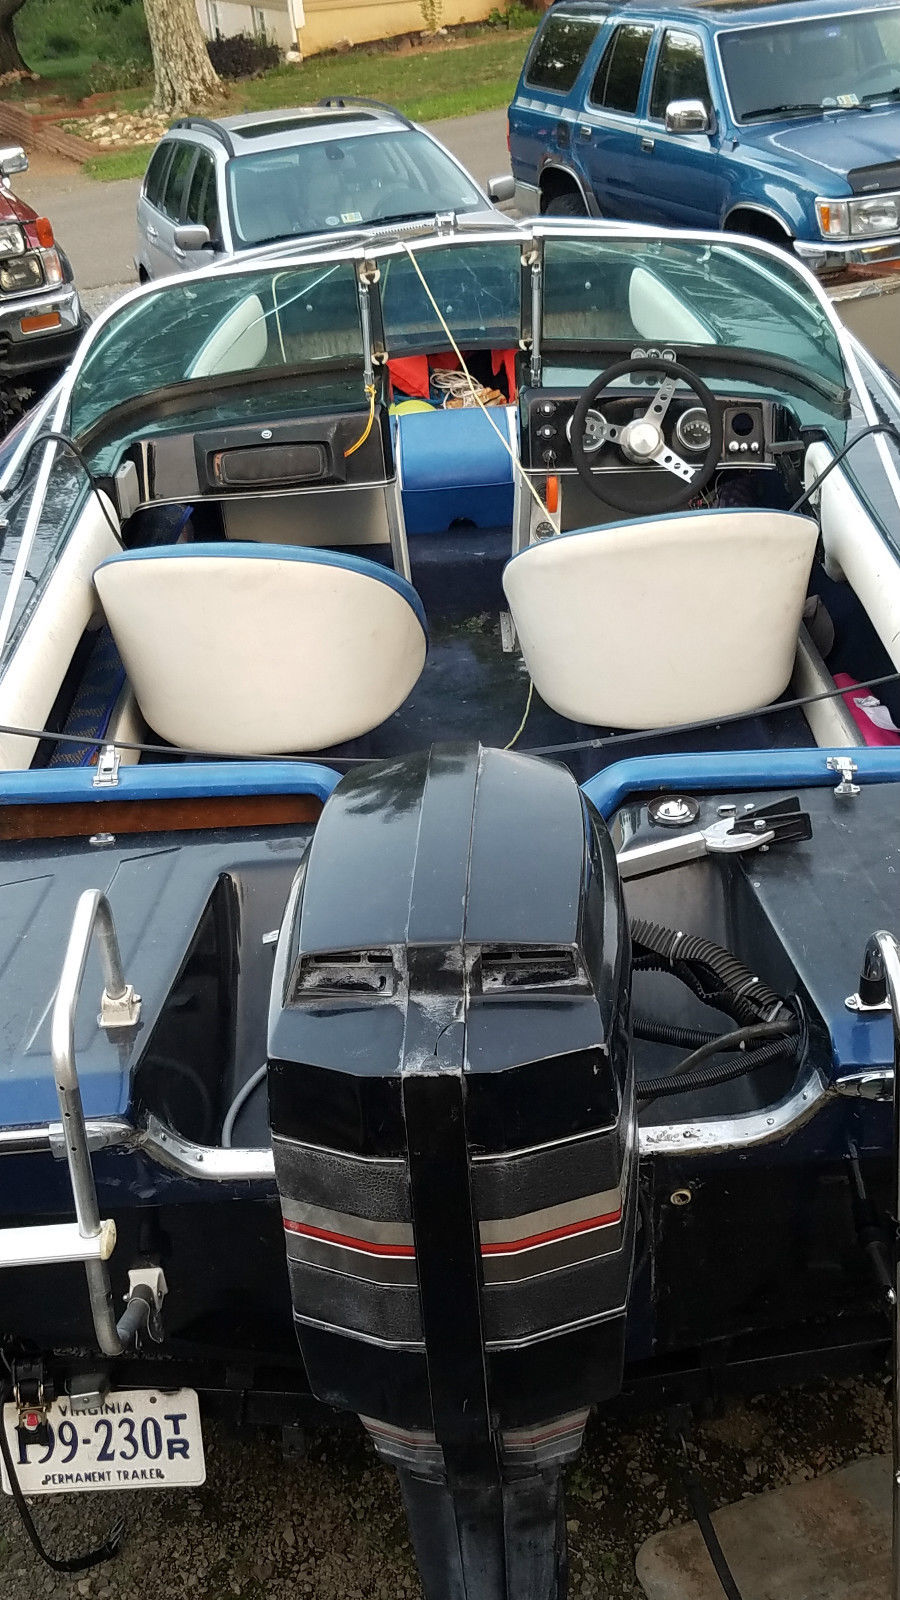 Checkmate 1975 for sale for $250 - Boats-from-USA.com